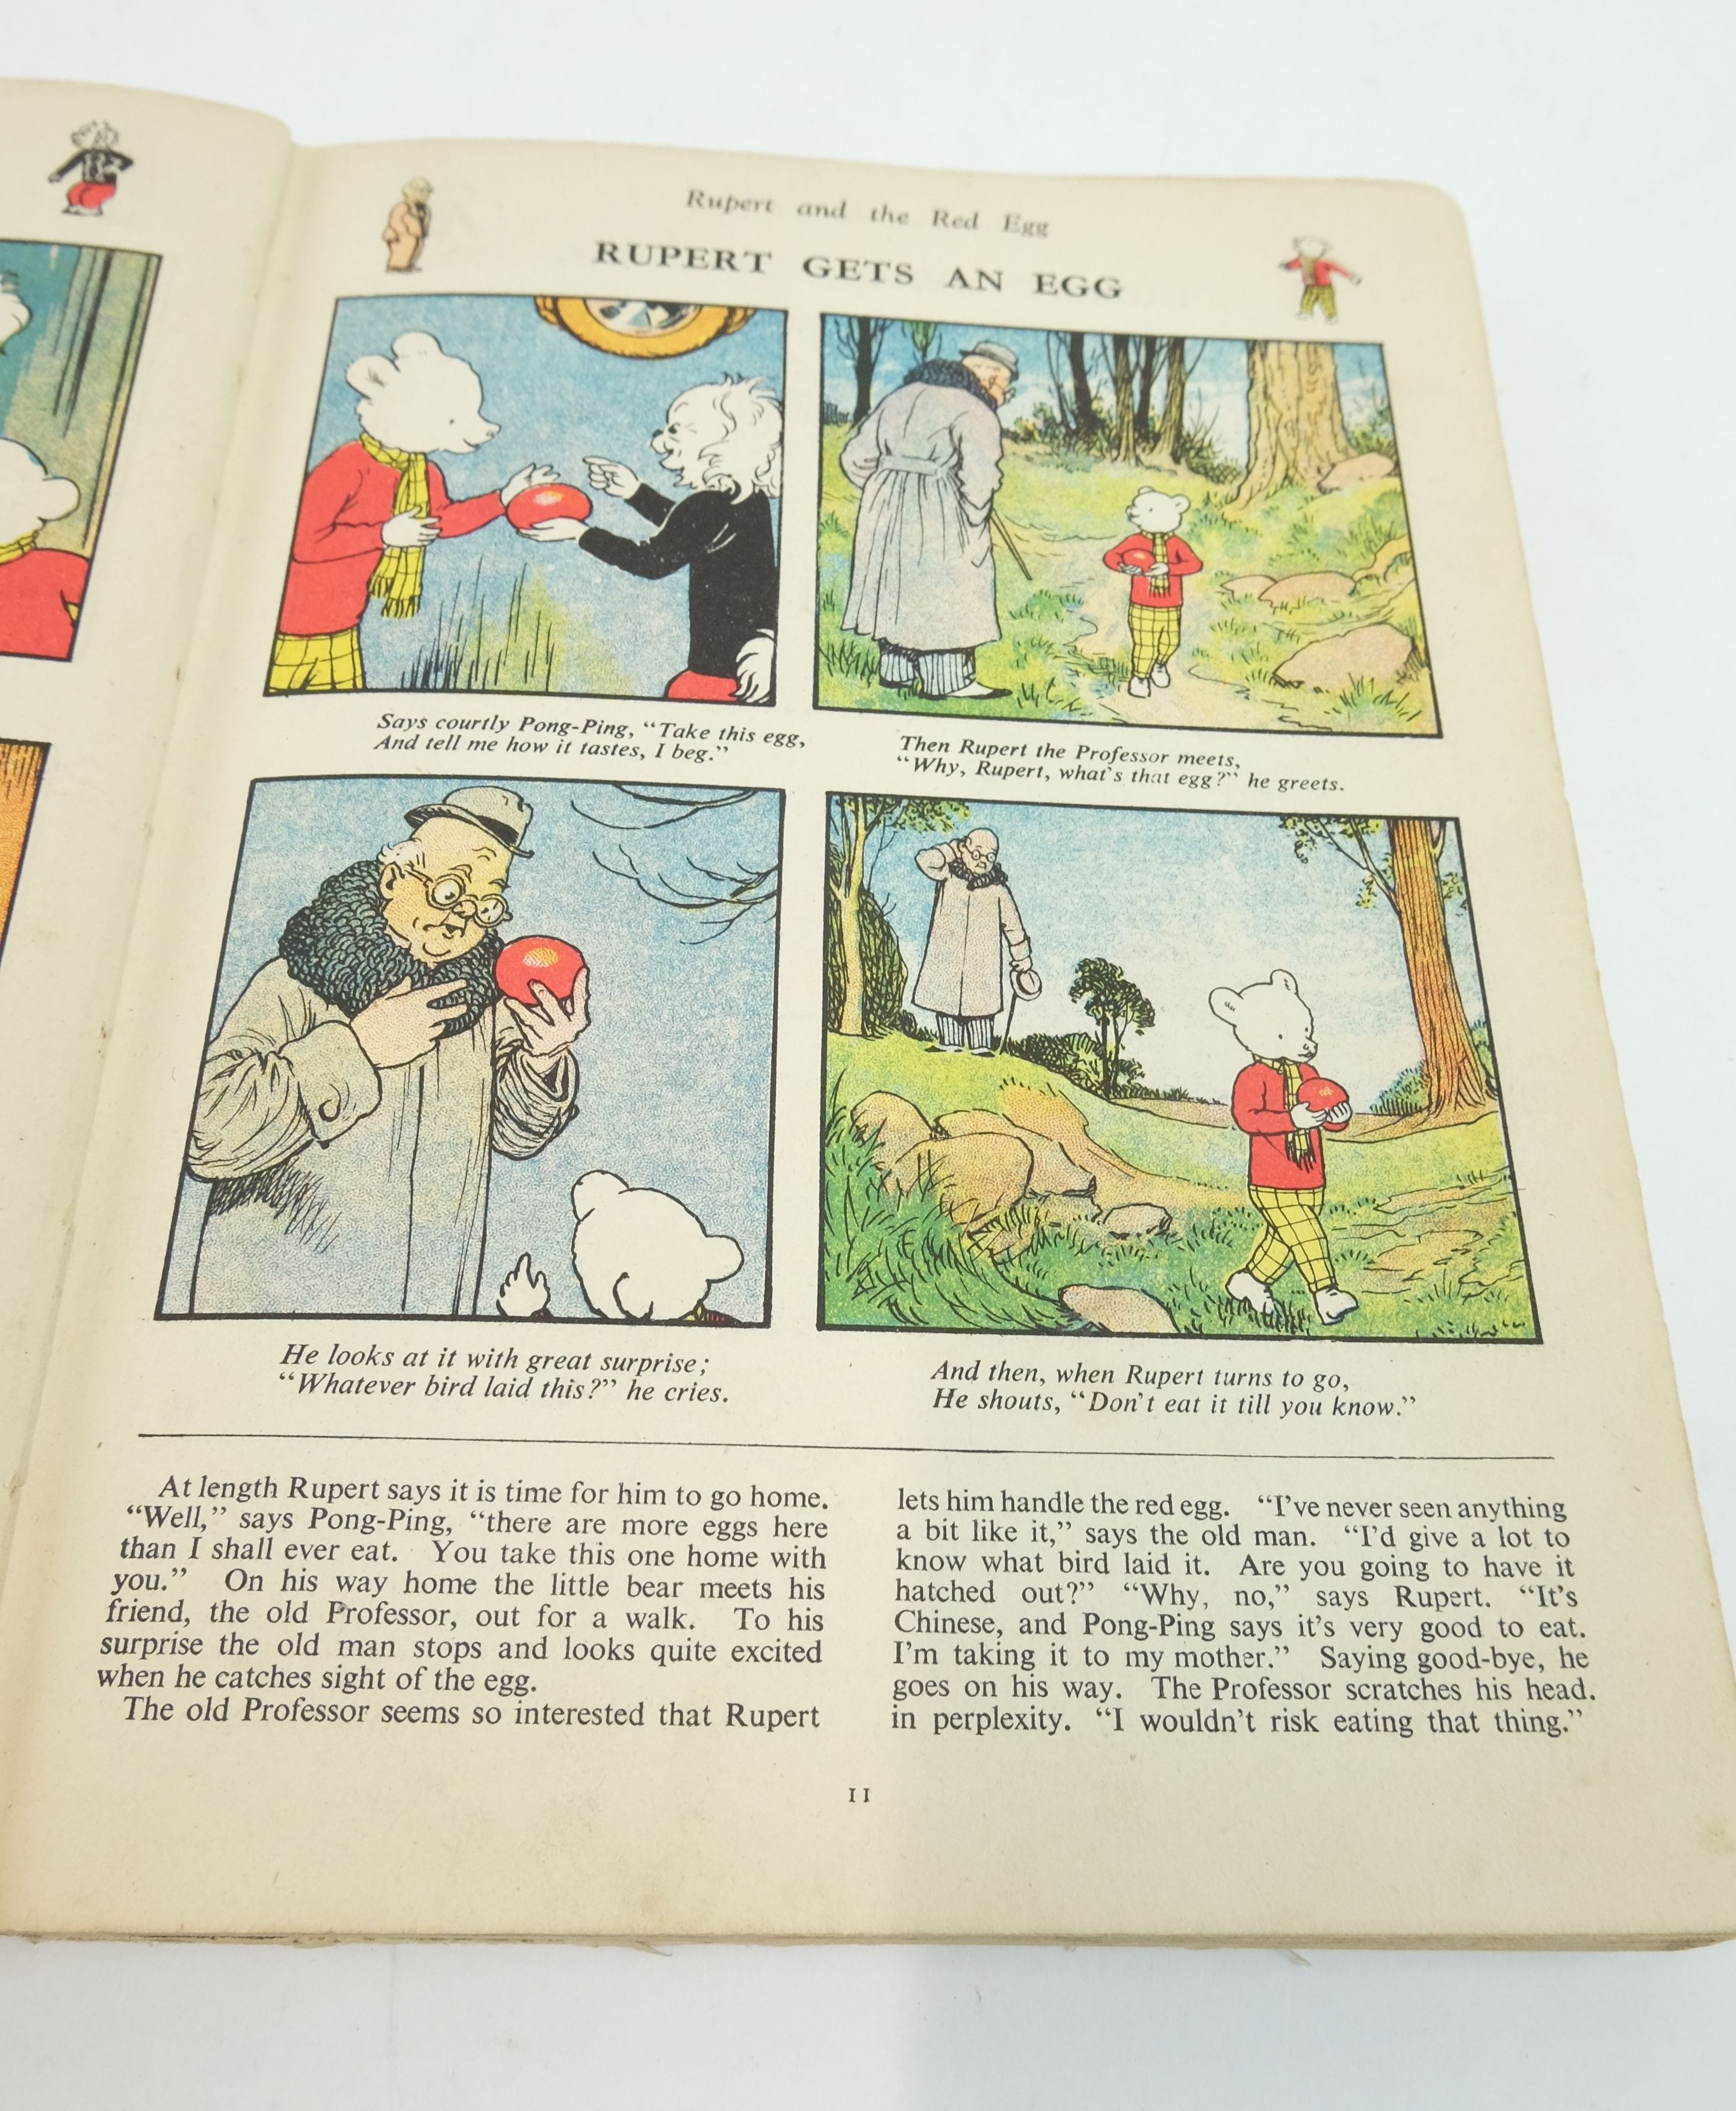 Photo of RUPERT ANNUAL 1941 - THE RUPERT BOOK written by Bestall, Alfred illustrated by Bestall, Alfred published by Daily Express (STOCK CODE: 1822382)  for sale by Stella & Rose's Books